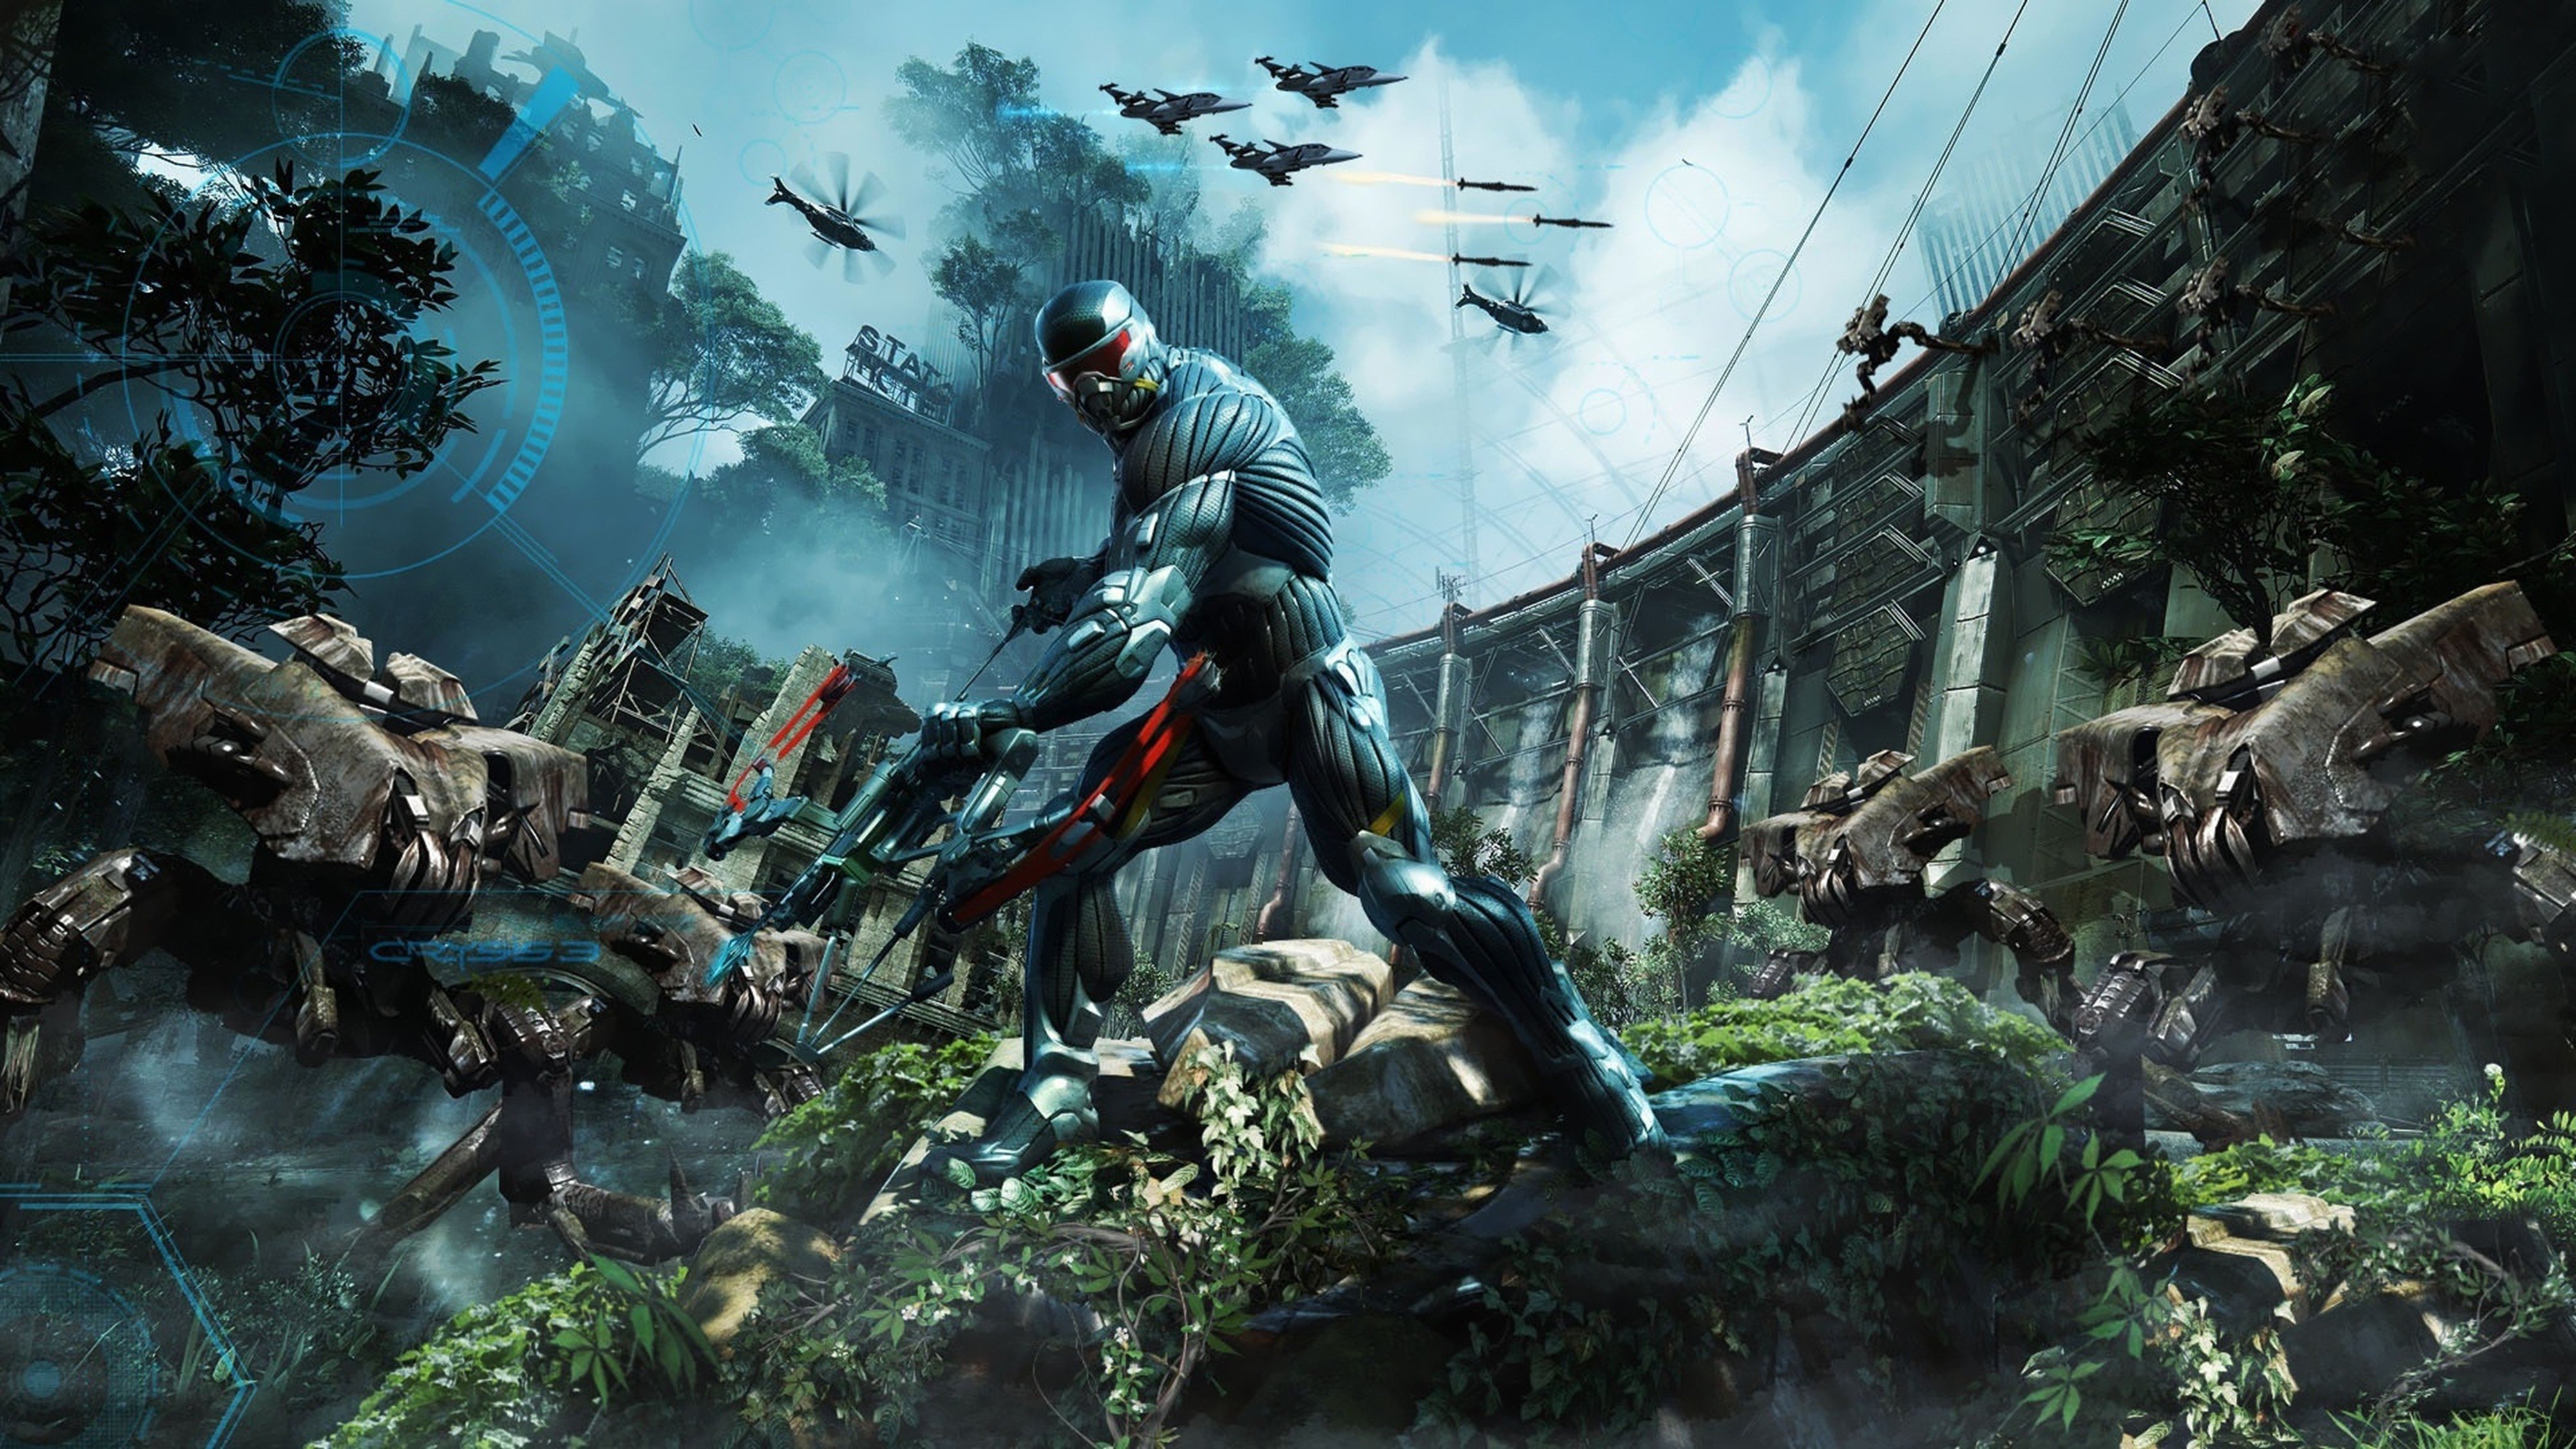 Games videos download. Крайзис 3. Crysis Remastered Trilogy. Игра крайсис 3. Crysis 3 Remastered.